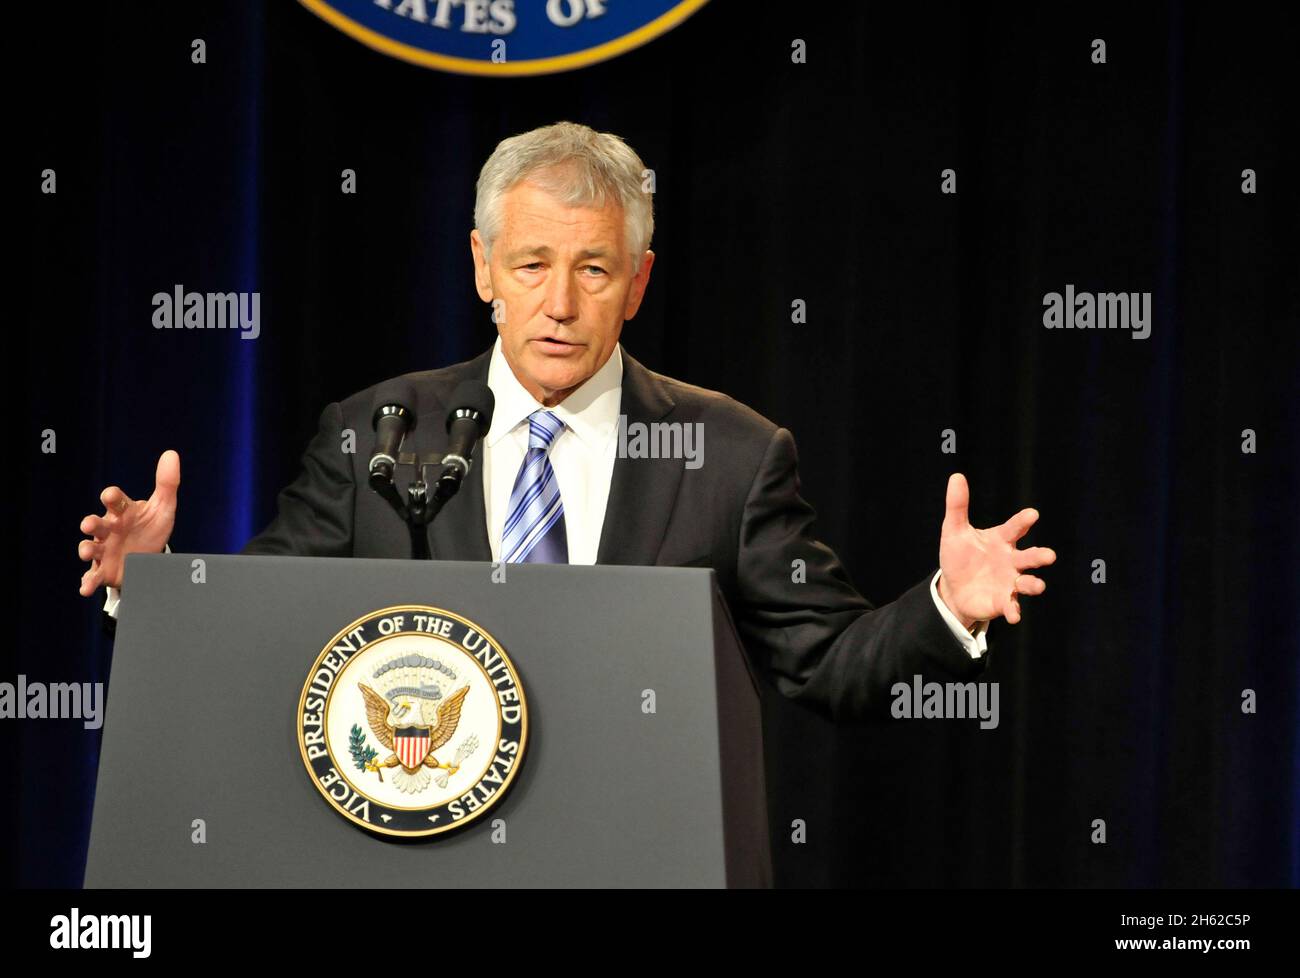 Secretary of Defense Chuck Hagel addresses the audience after he was sworn in as 24th Secretary of Defense during a ceremony in the Pentagon Auditorium,  March 14, 2013. Stock Photo